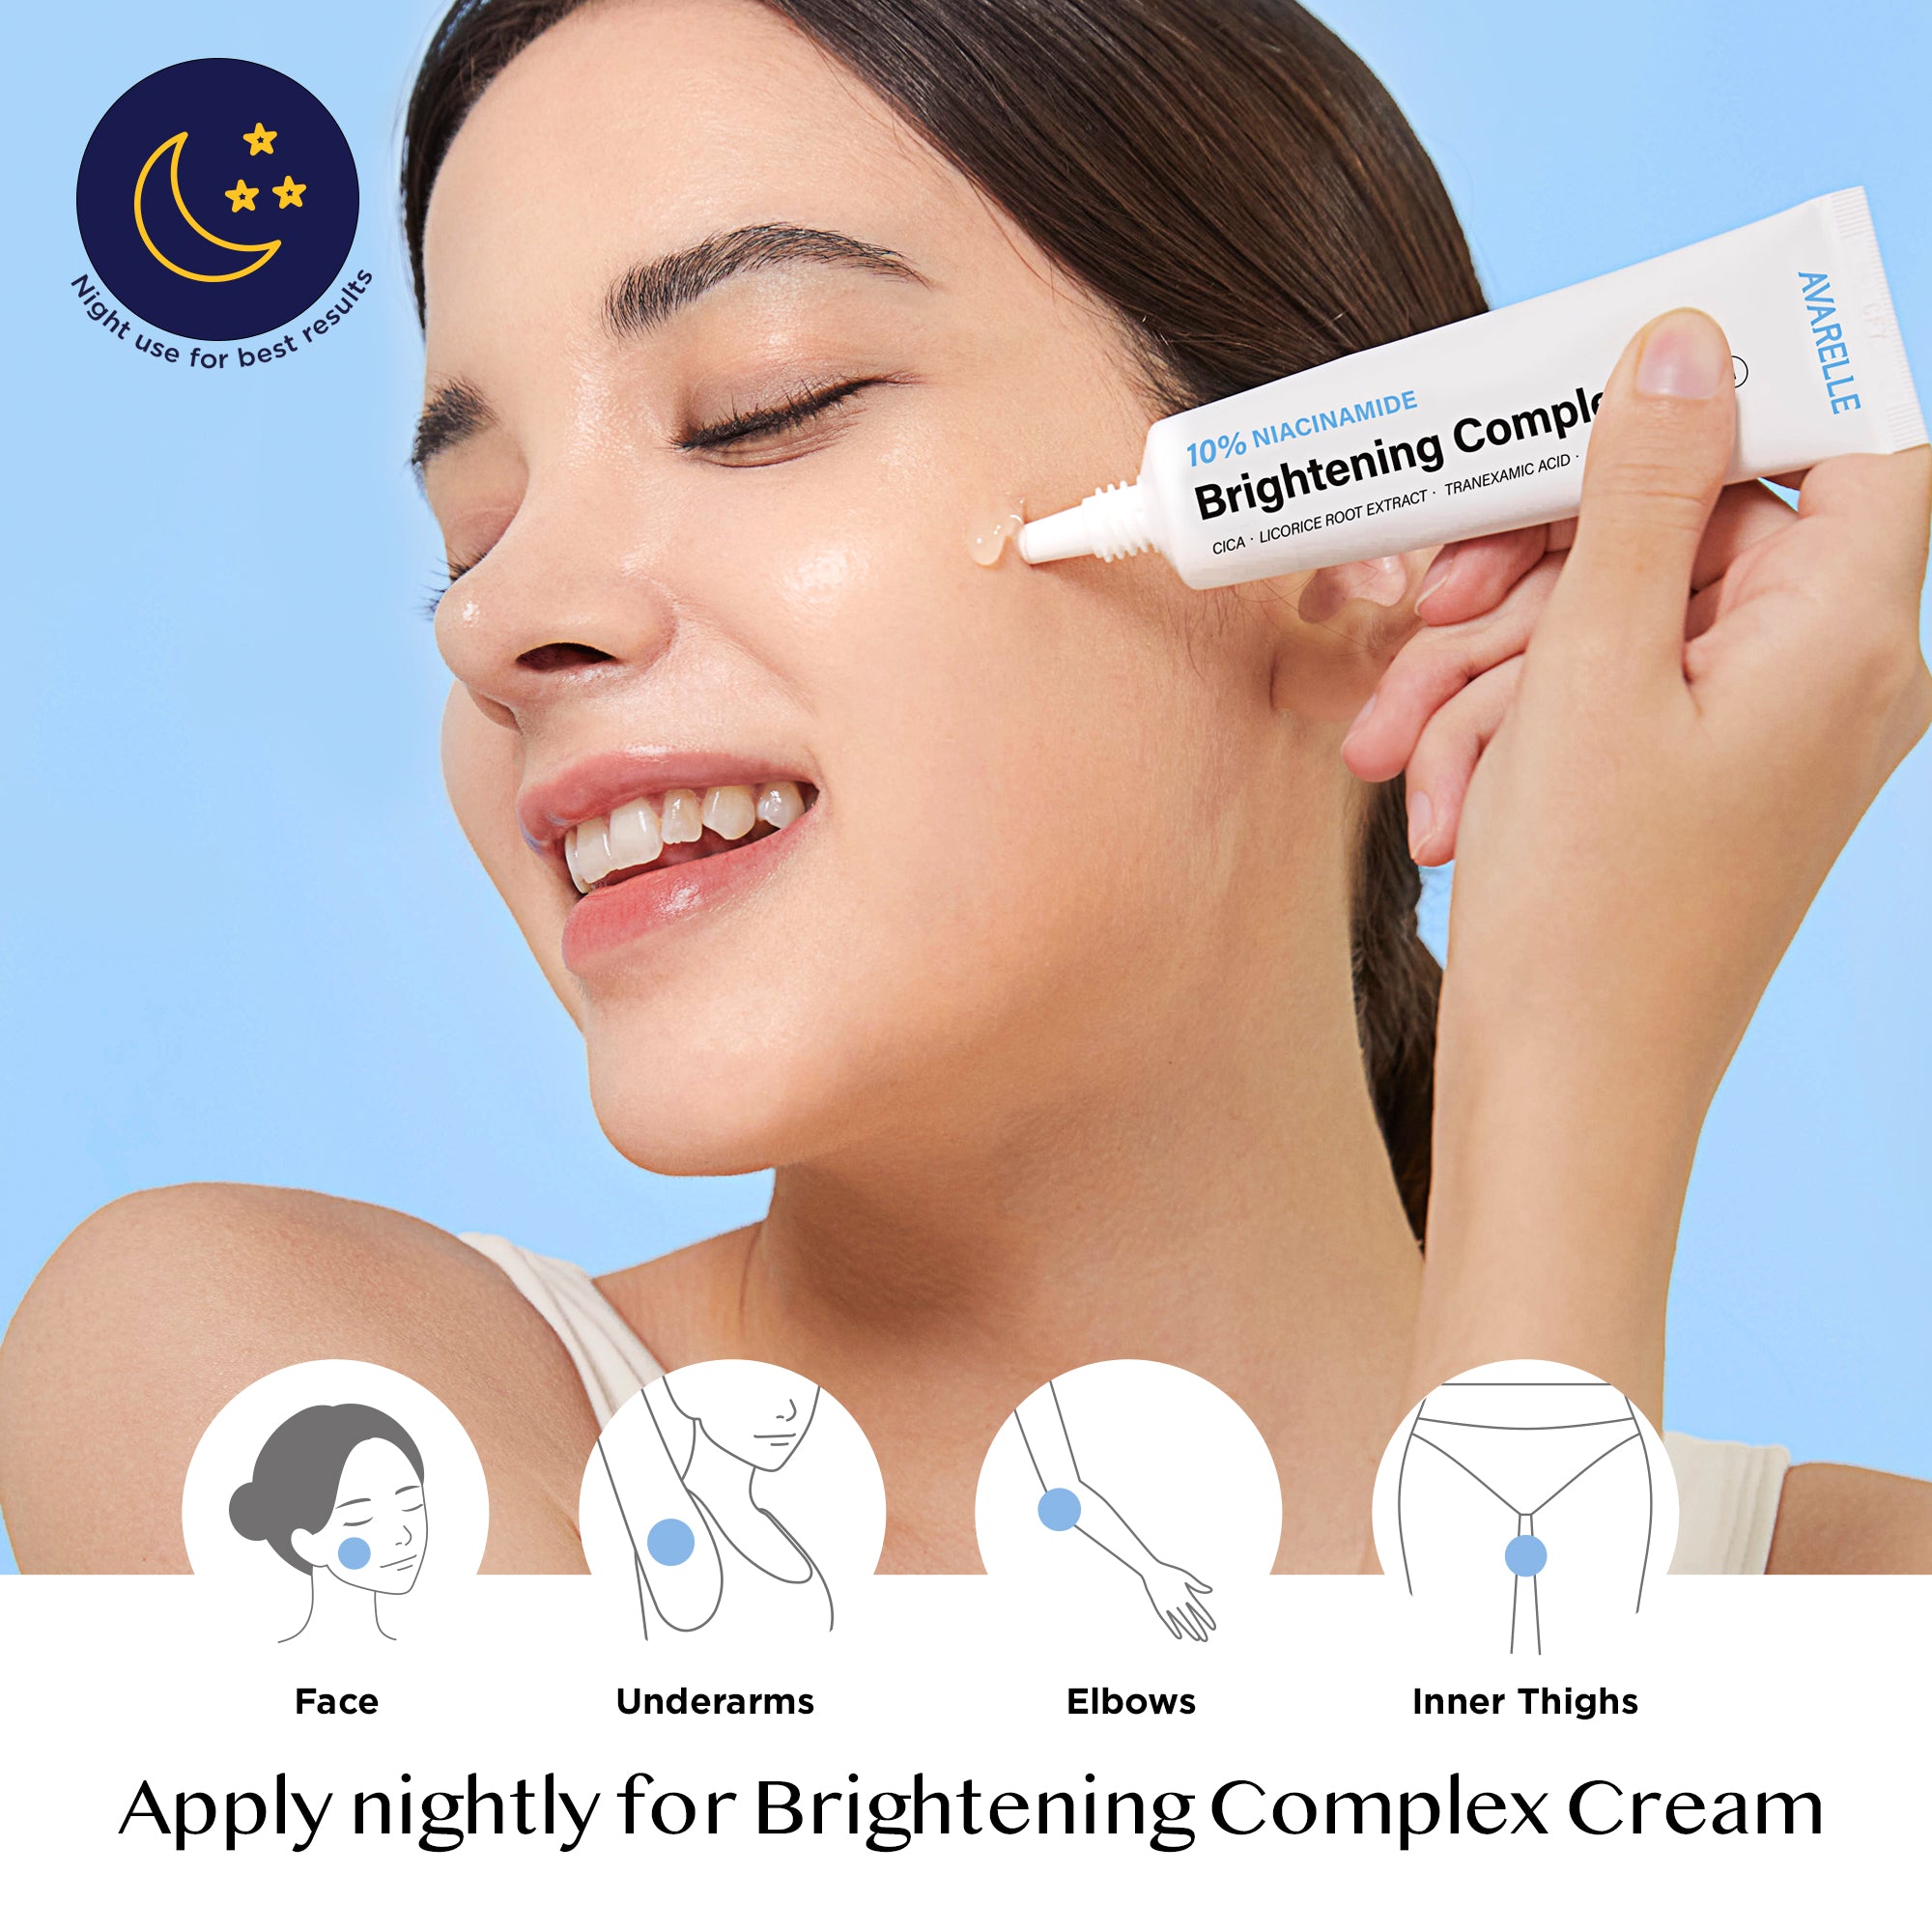 Woman applying Avarelle's 10% Niacinamide Brightening Complex cream to her face, with icons indicating the cream can also be used on underarms, elbows, and inner thighs. Formulated with tranexamic acid, cica, and Tranexamic Acid.  For best results, use at night.